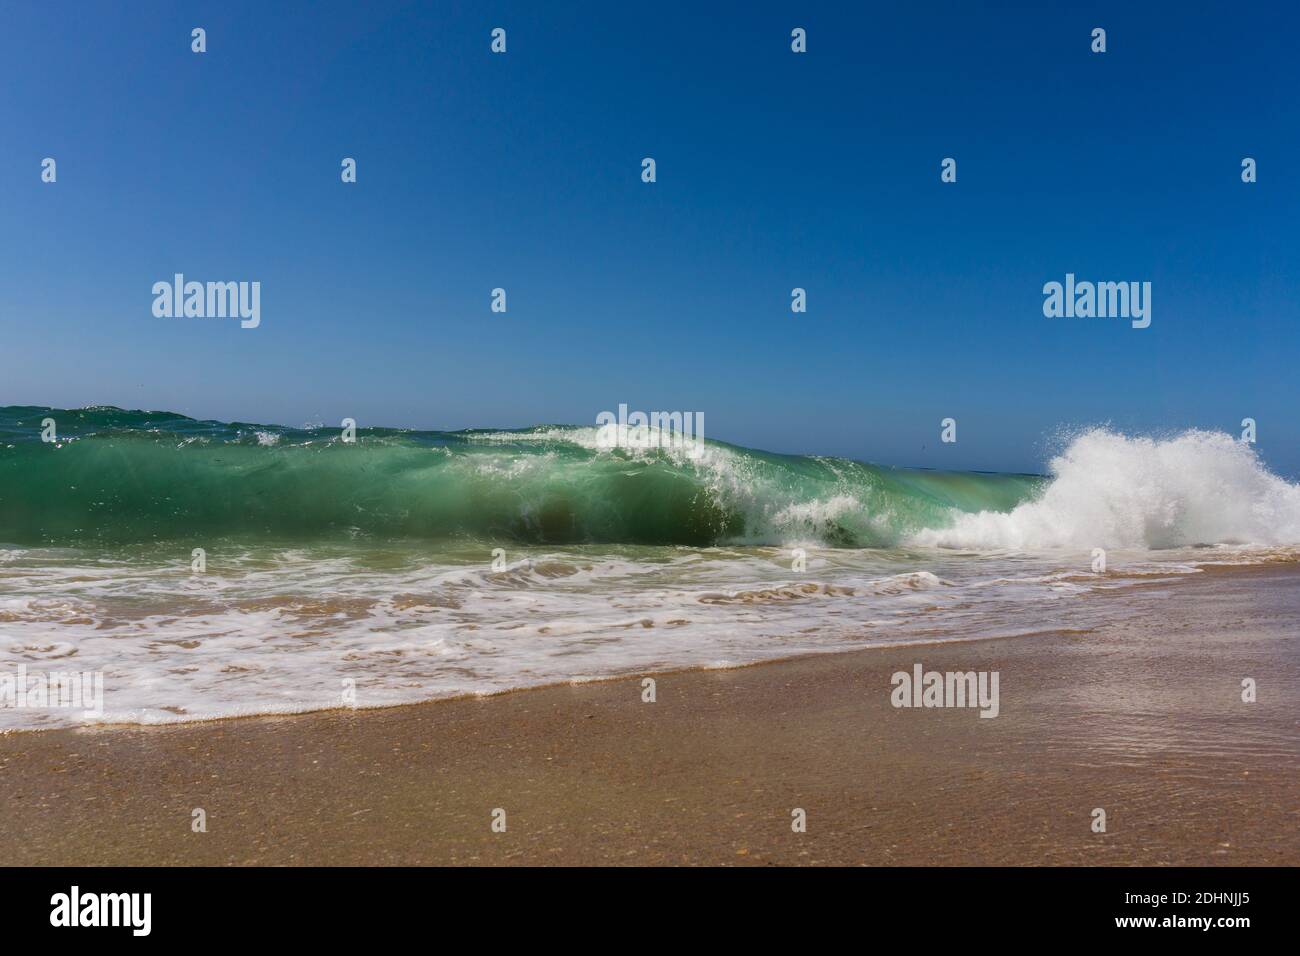 A wave curling over and crashing onto sandy beach under a blue sunny sky Stock Photo